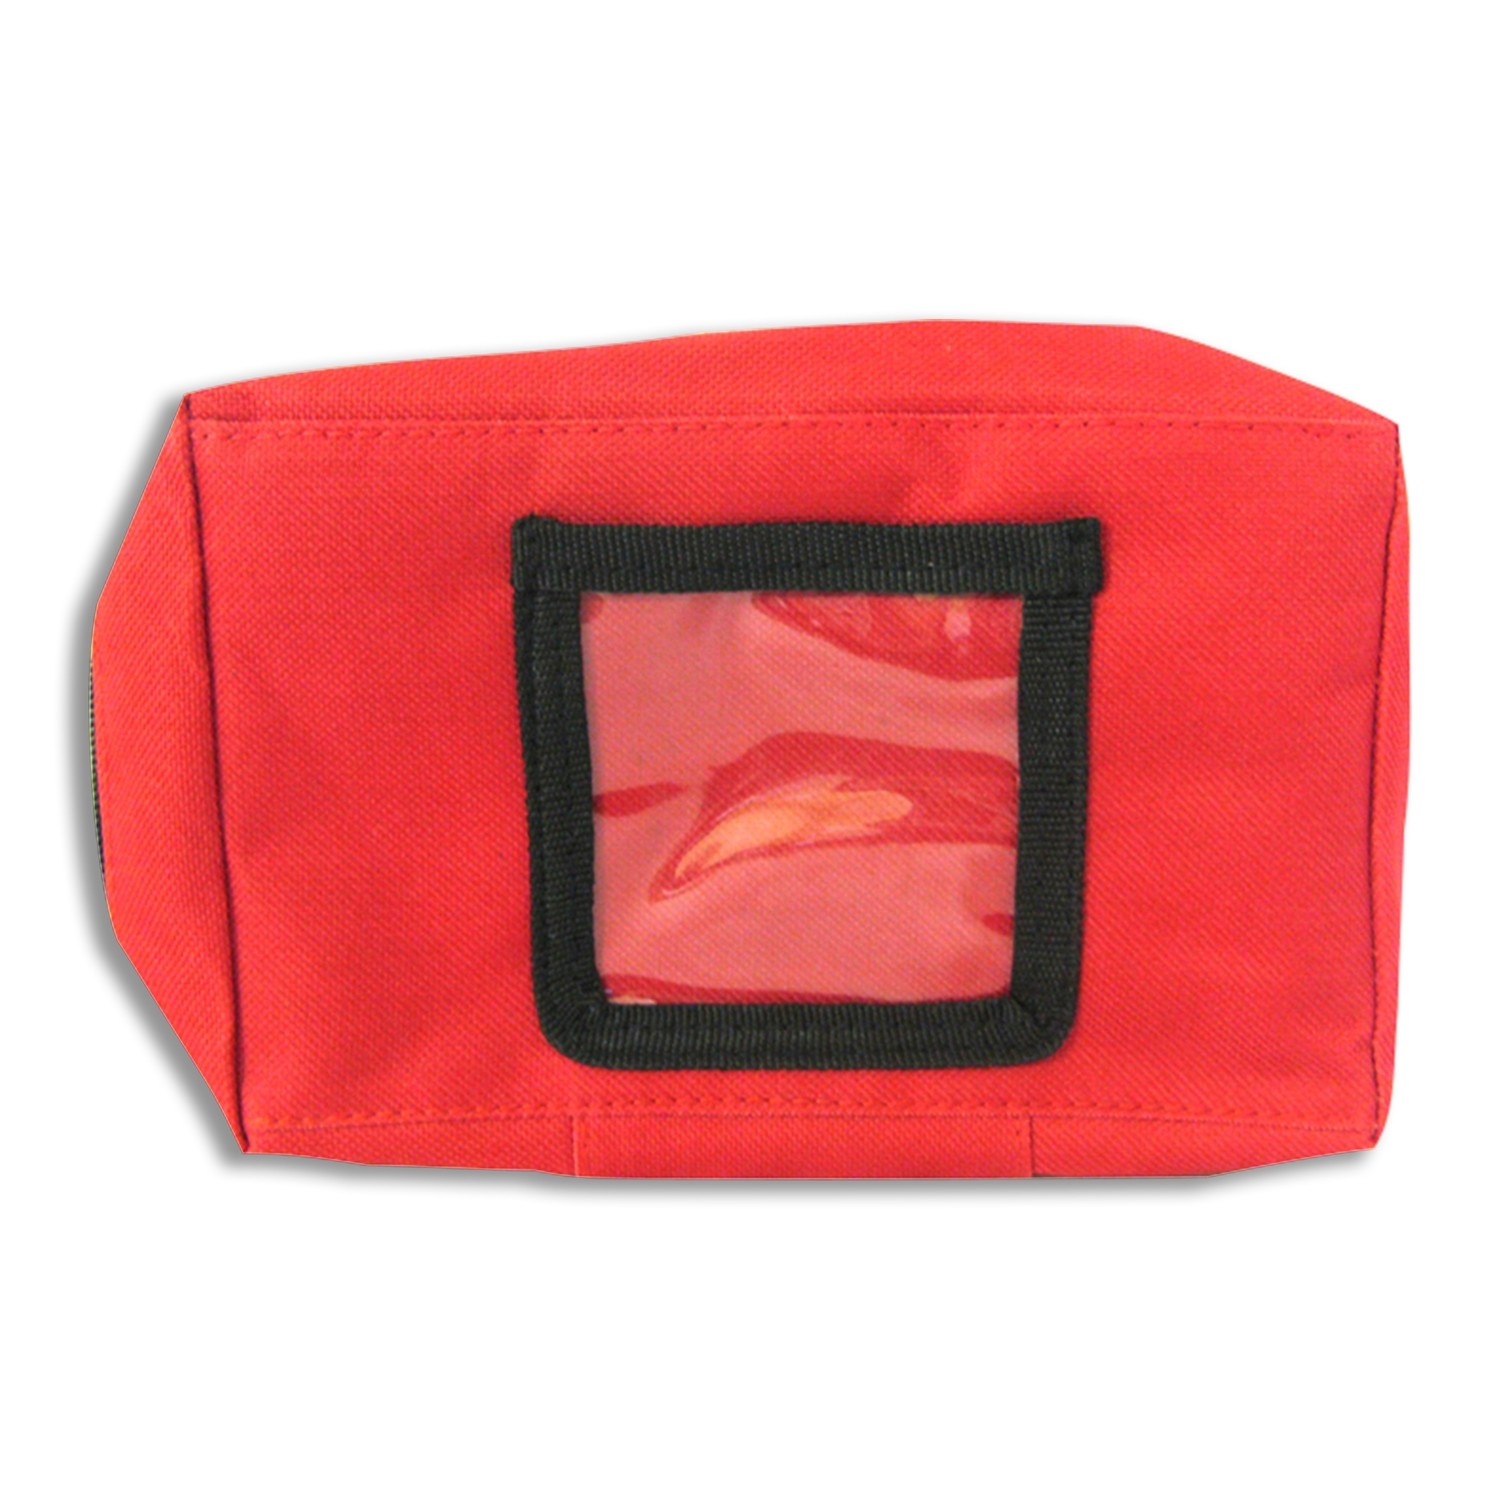 Red Softpack First Aid Bag Small (Bag Only)